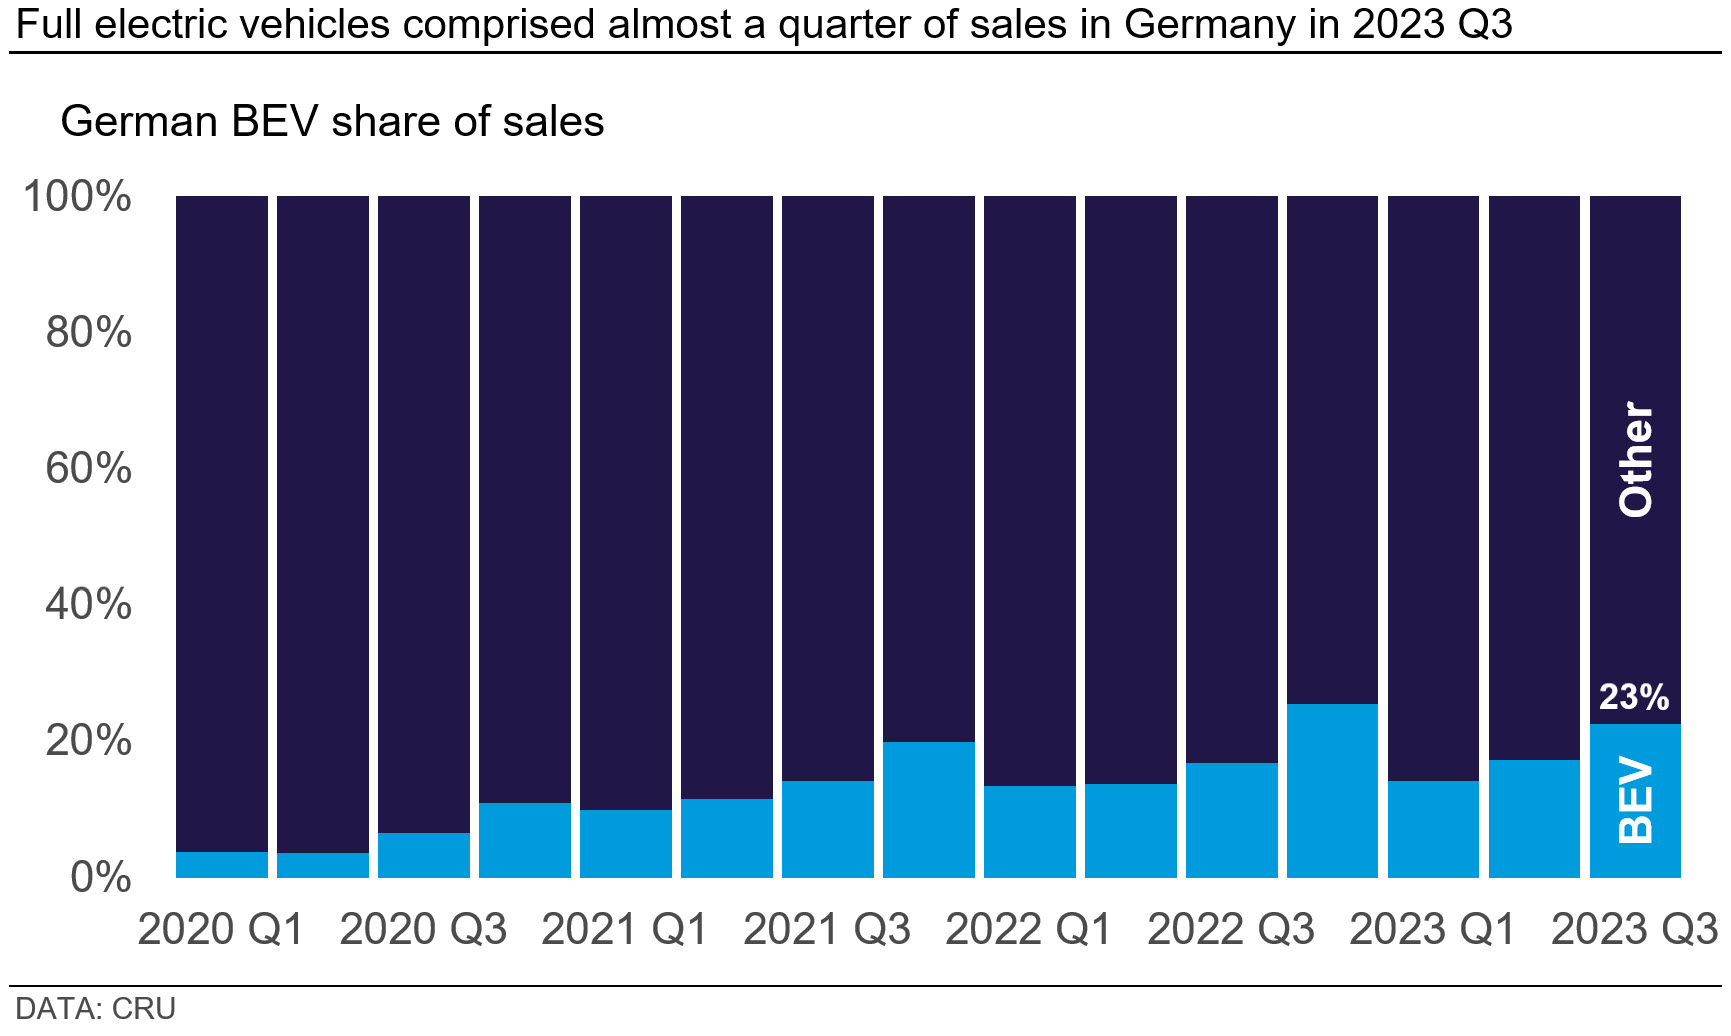 Graph showing how full electric vehicles comprised almost a quarter of sales in Germany in Q3 of 2023.